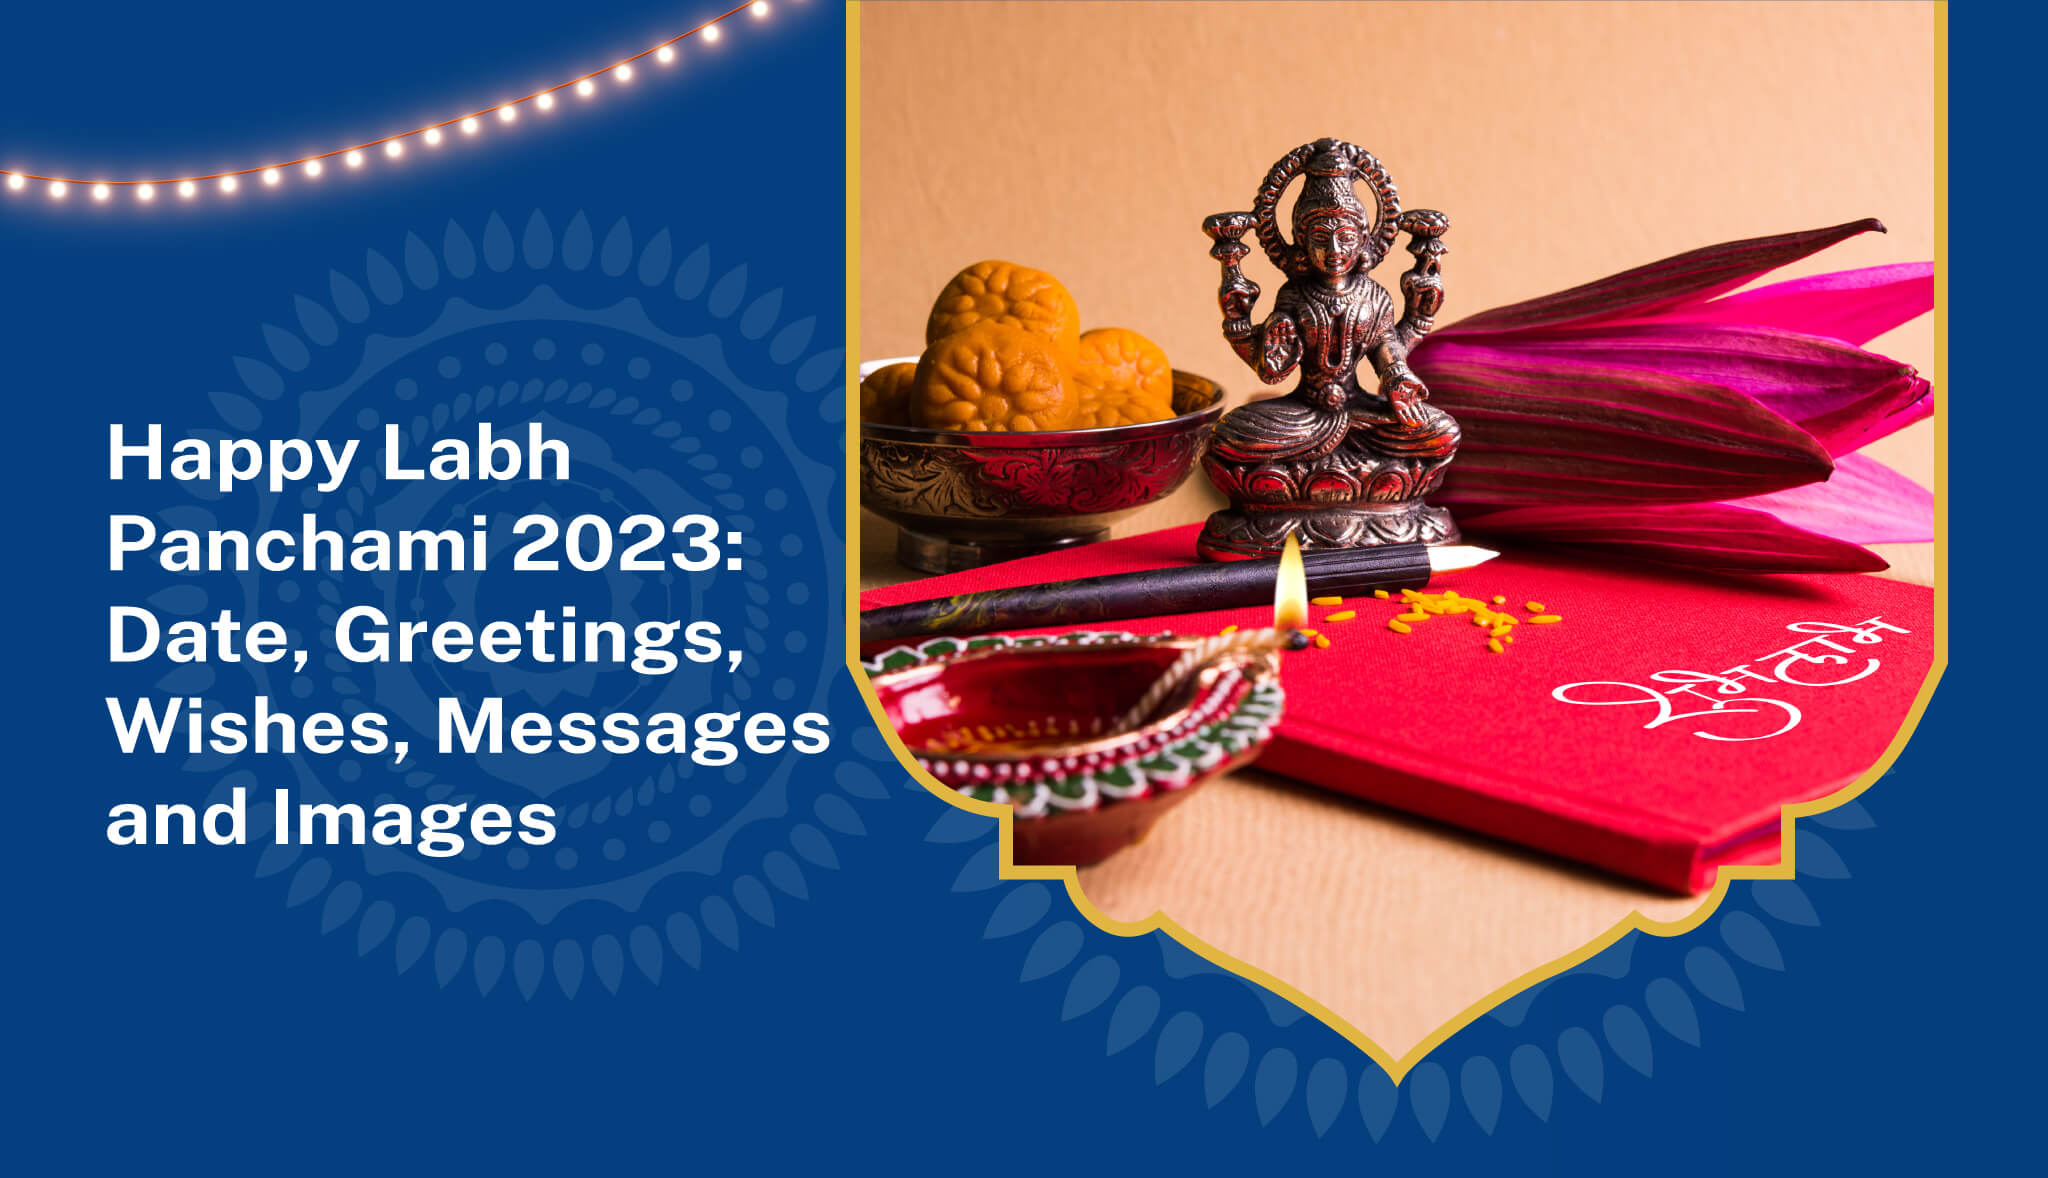 Unique greetings and creative images to wish Labh Panchami 2023 - Post it